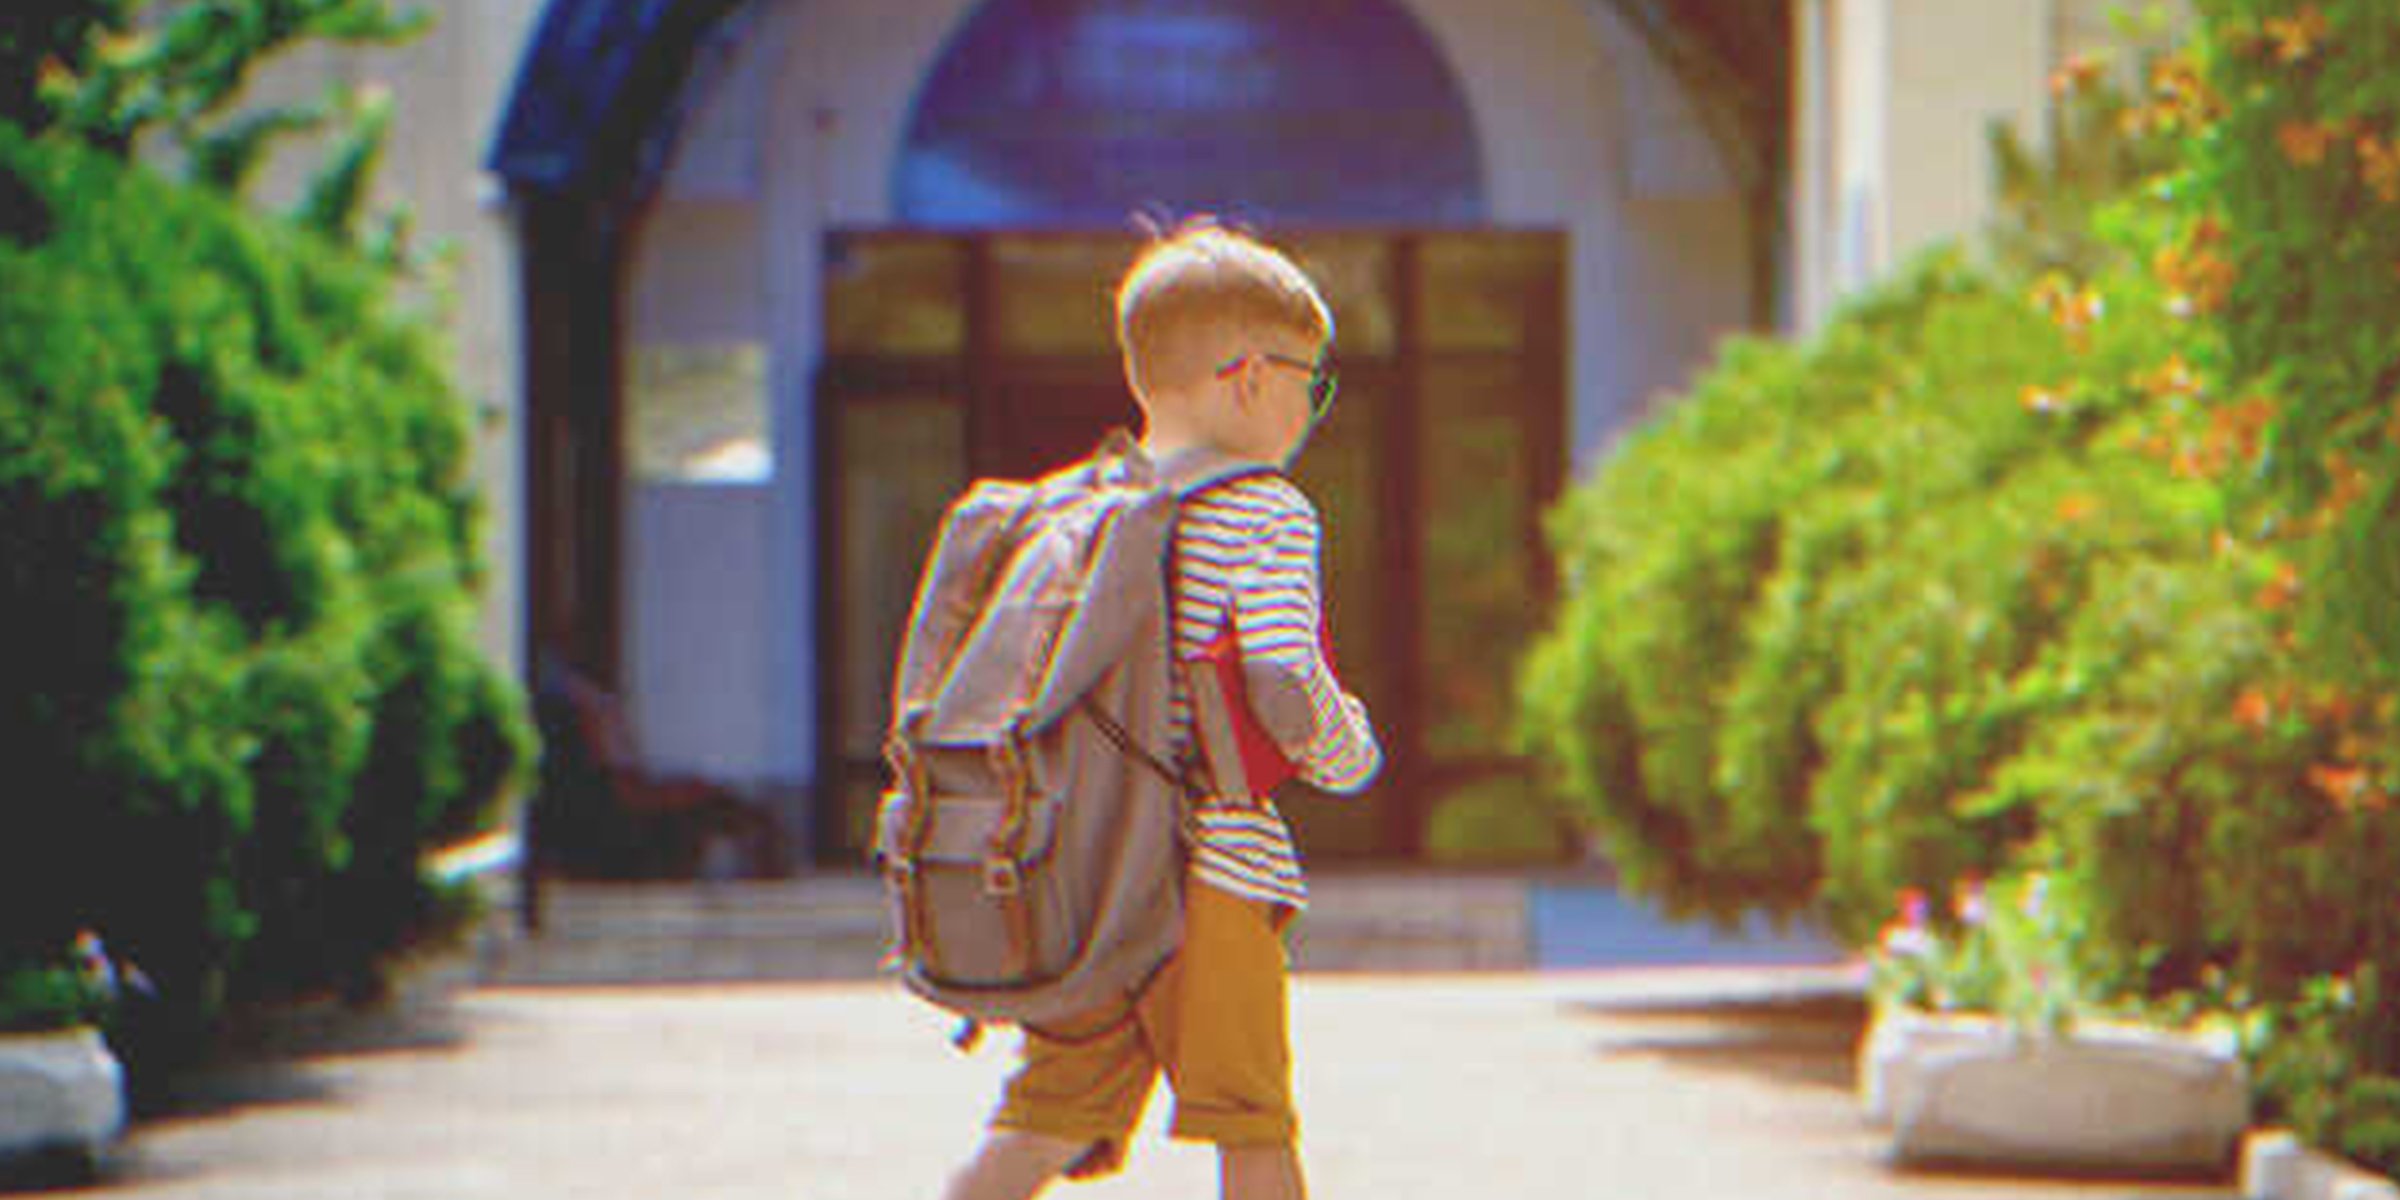 A kid with a backpack walking to a building | Source: Shutterstock